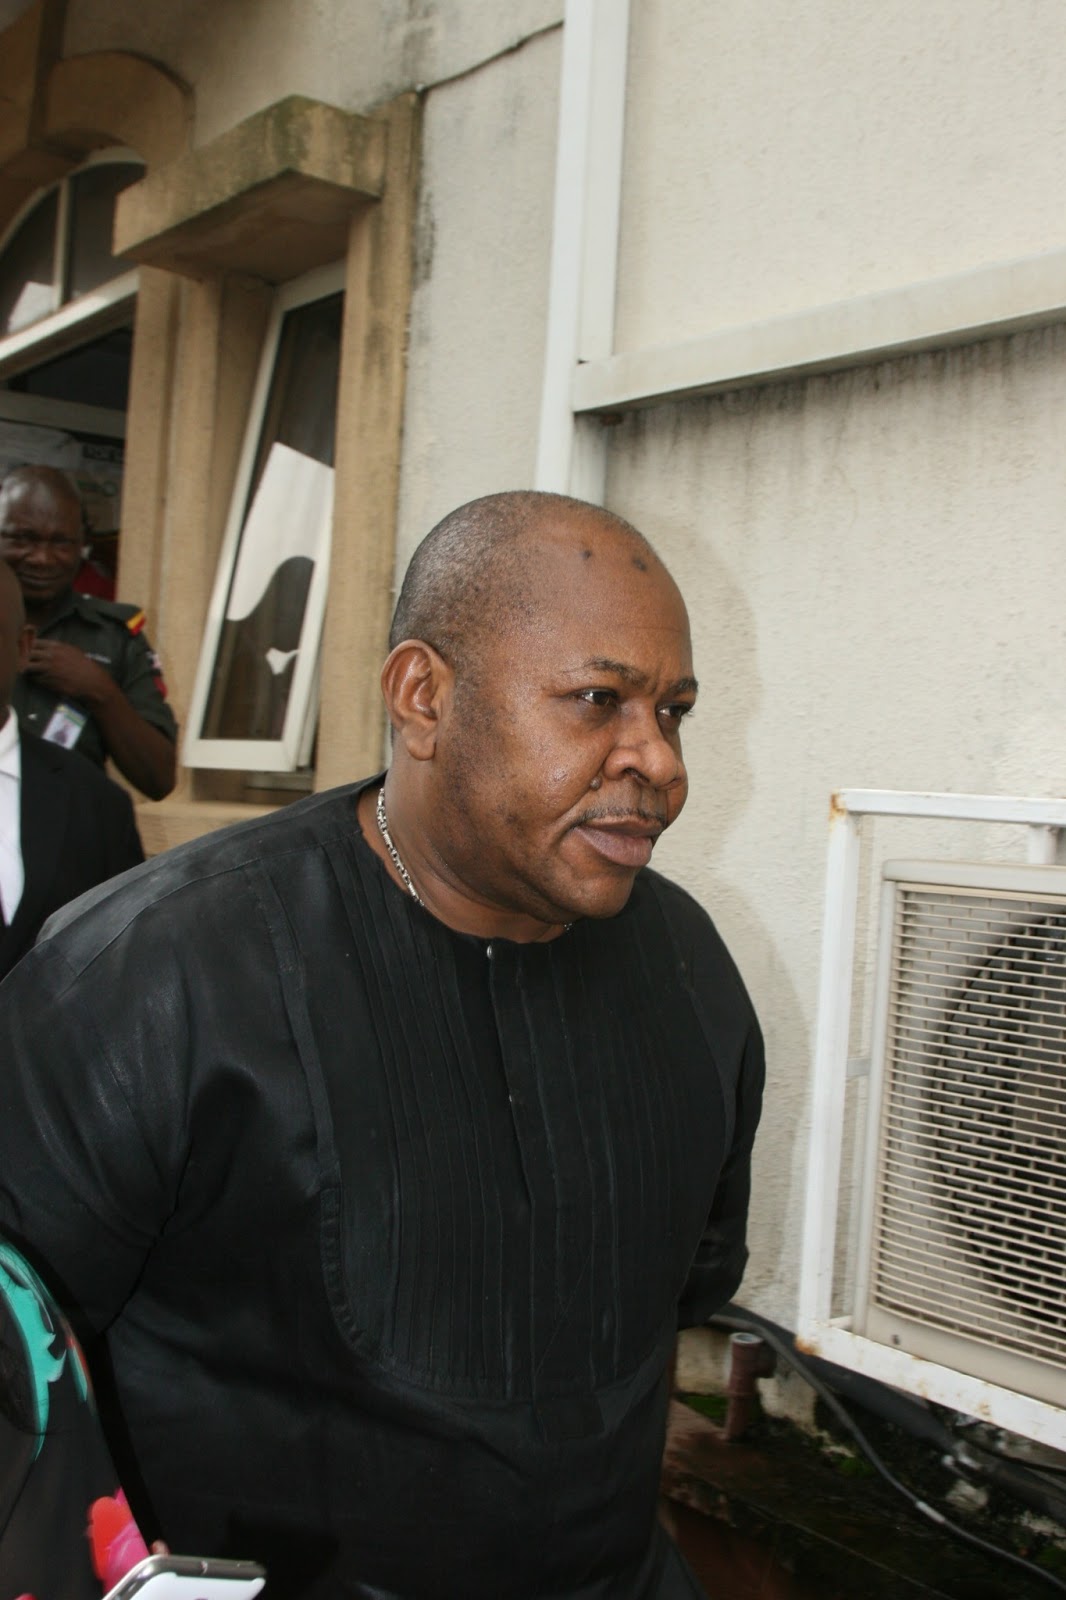 Fred Ajudua, a figure notoriously recognized as one of the pioneers of Nigeria's infamous '419' advance fee fraud pictured in court in an undated photo